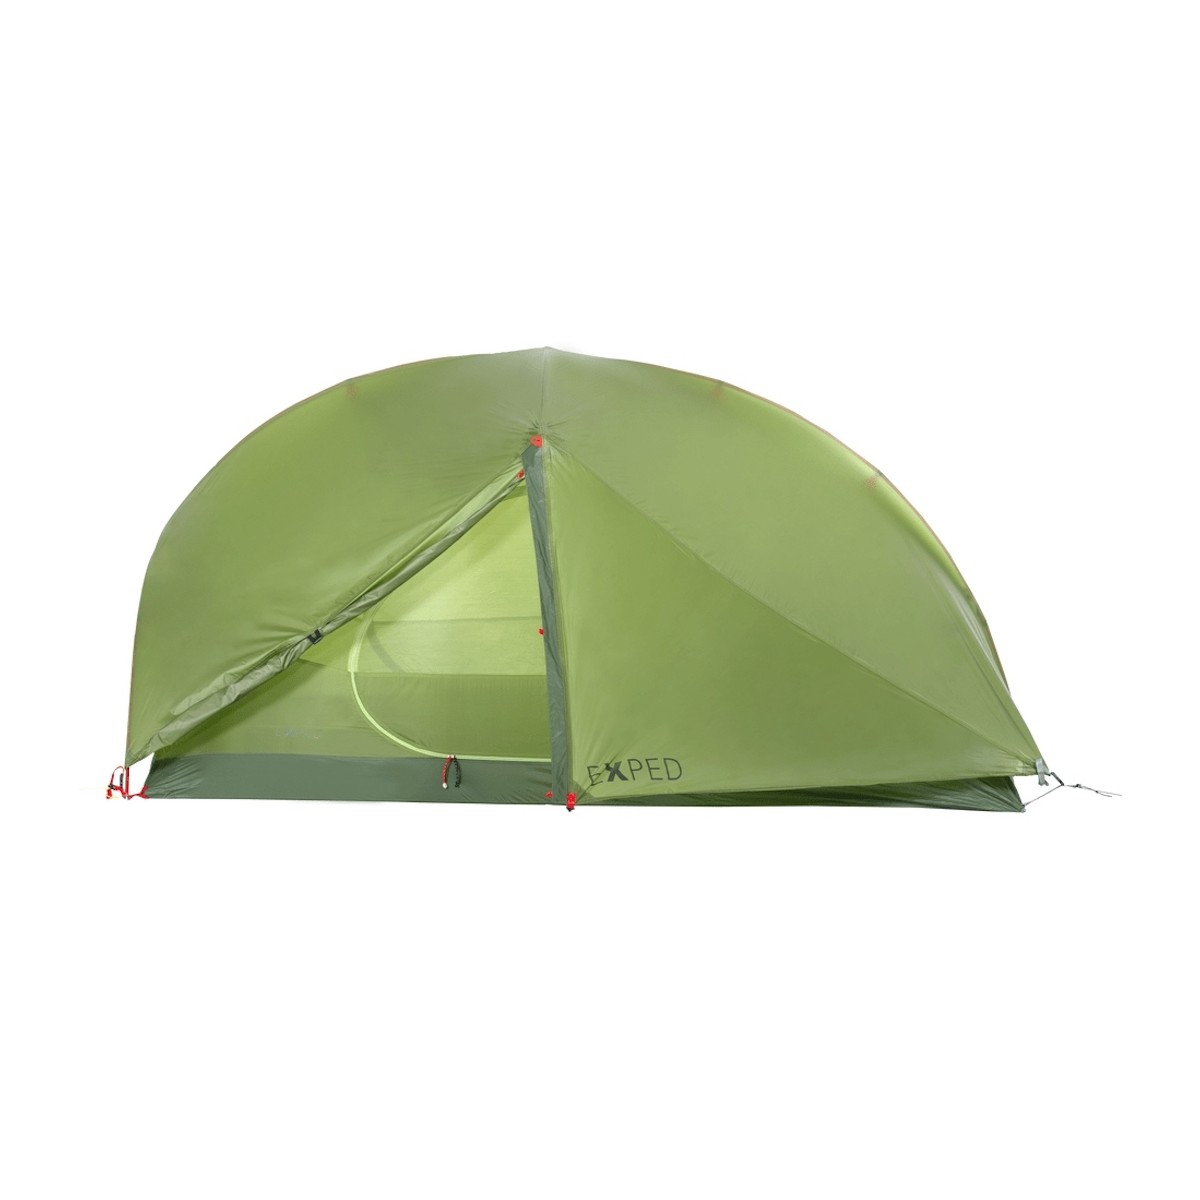 EXPED MIRA I HL tent - meadow